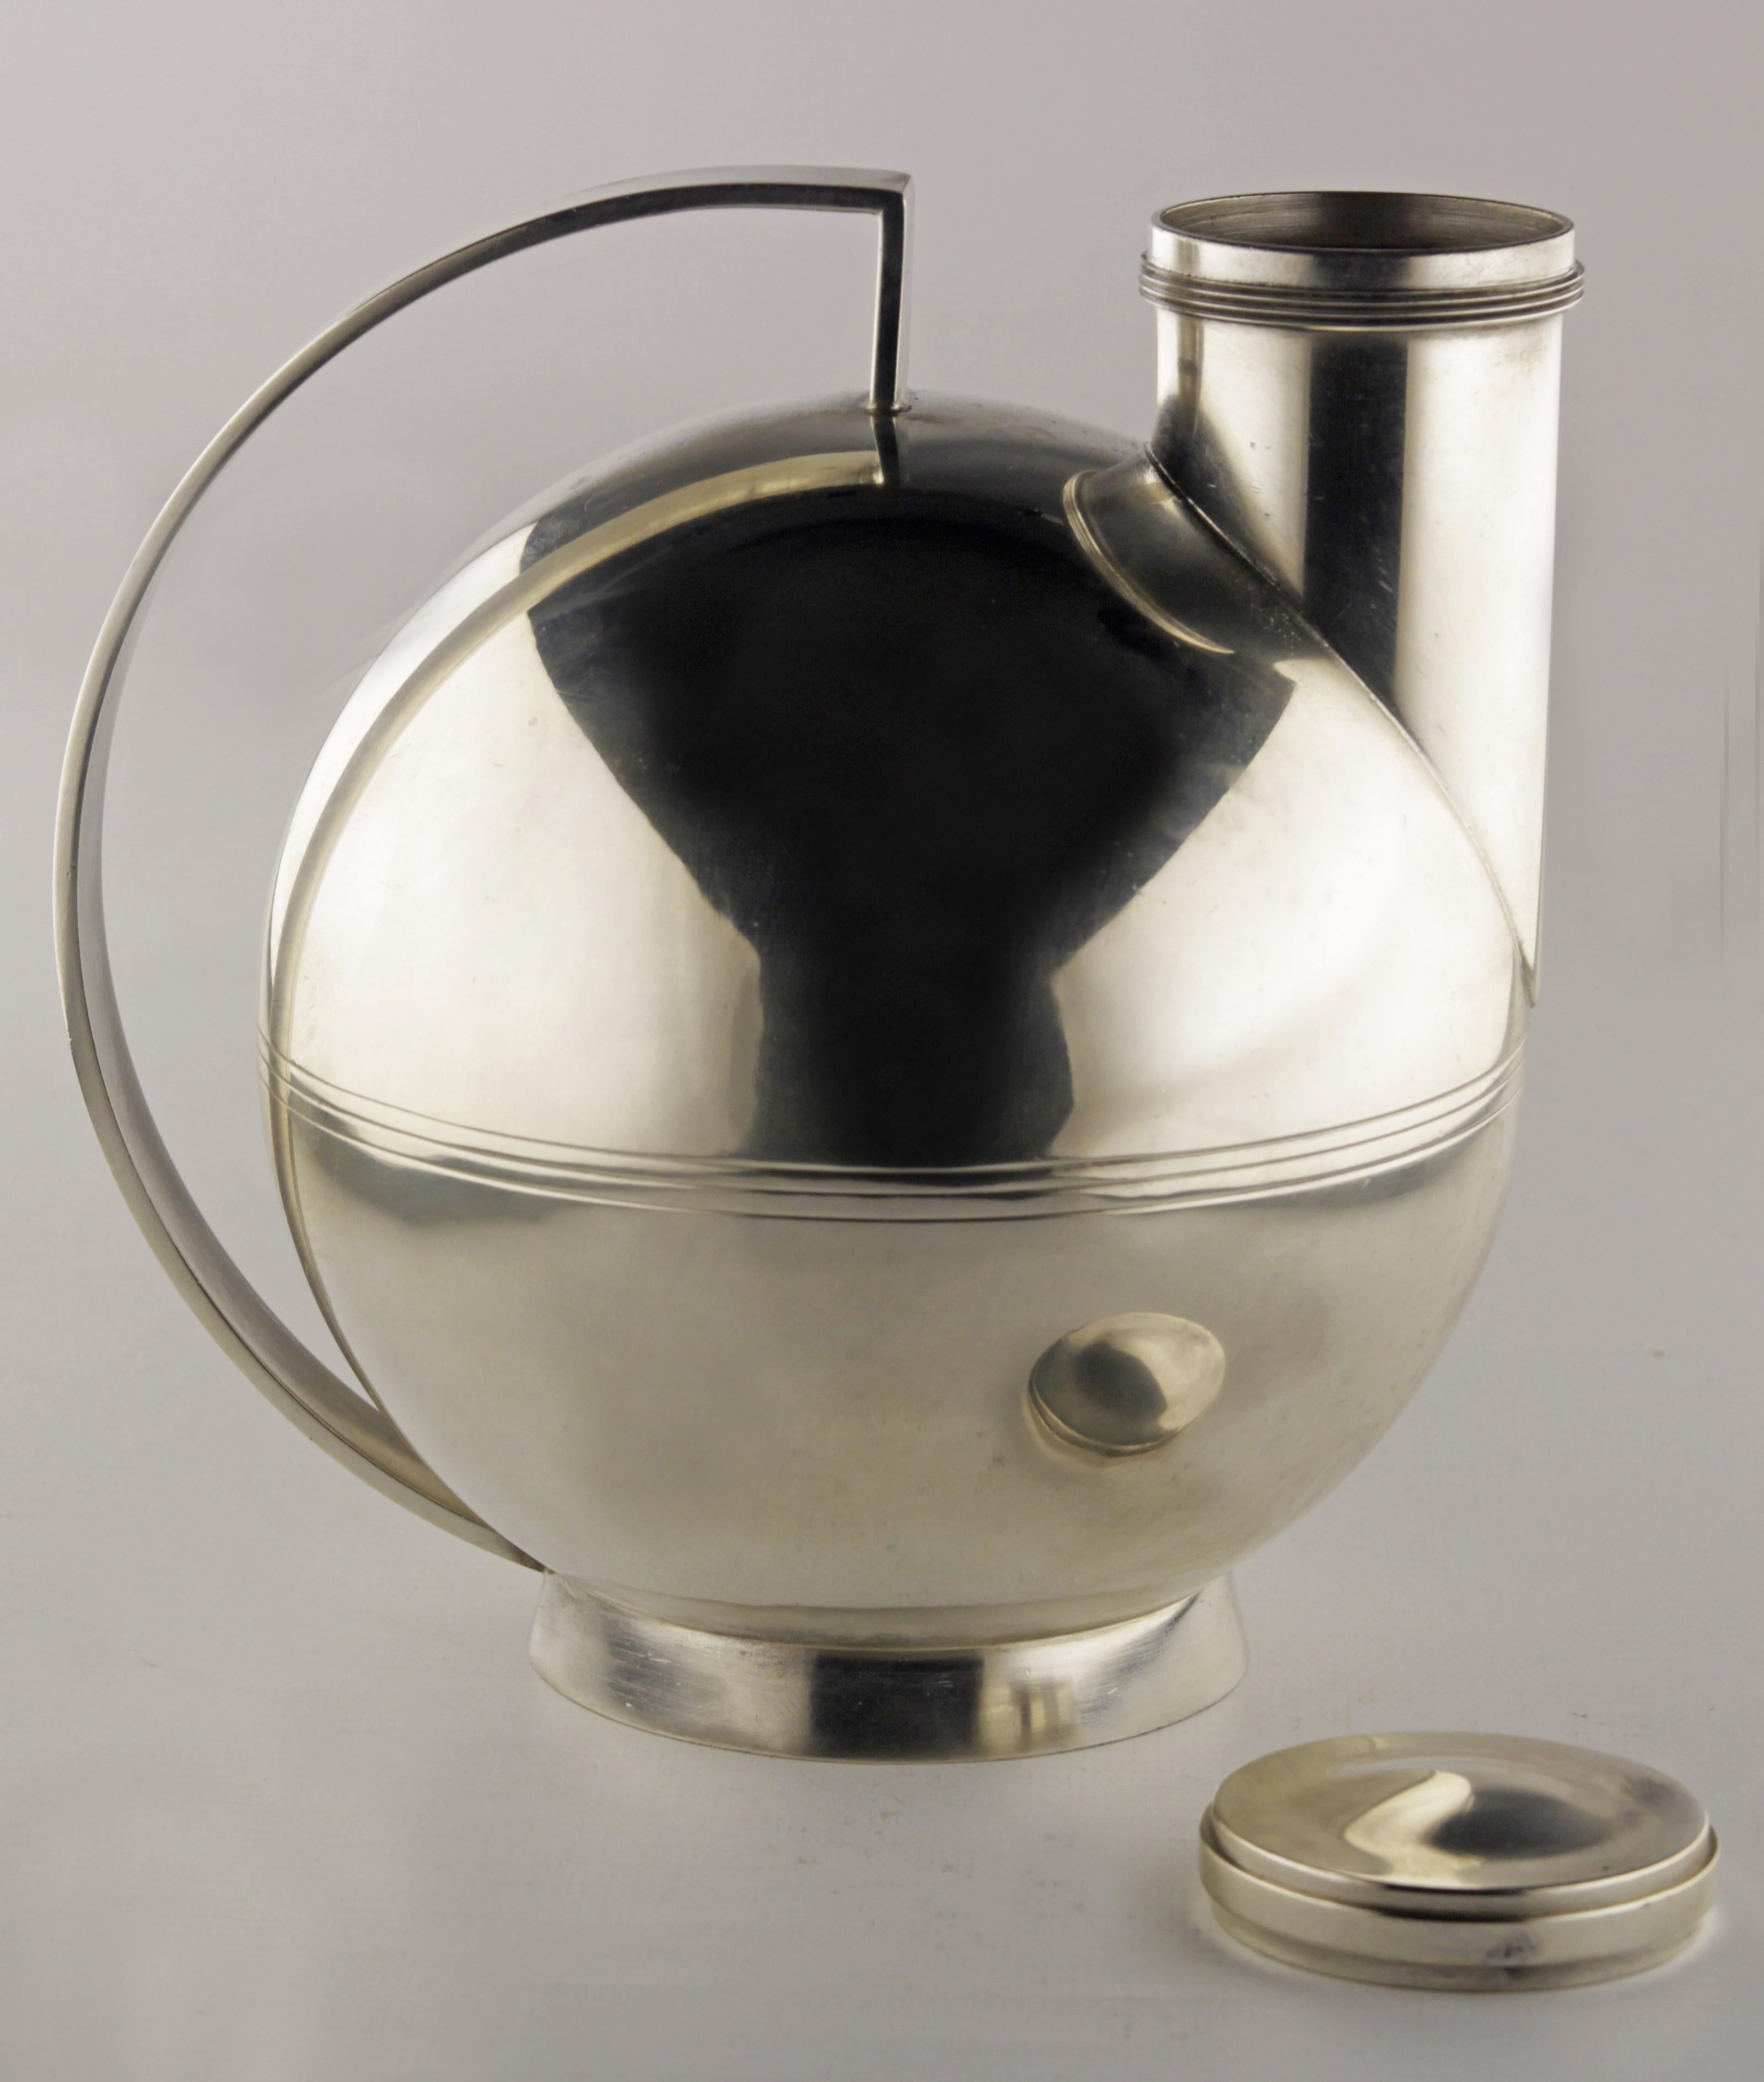 Art Déco/Modernist Silver Spherical Cocktail Shaker by Swedish Sylvia Stave In Good Condition For Sale In North Miami, FL